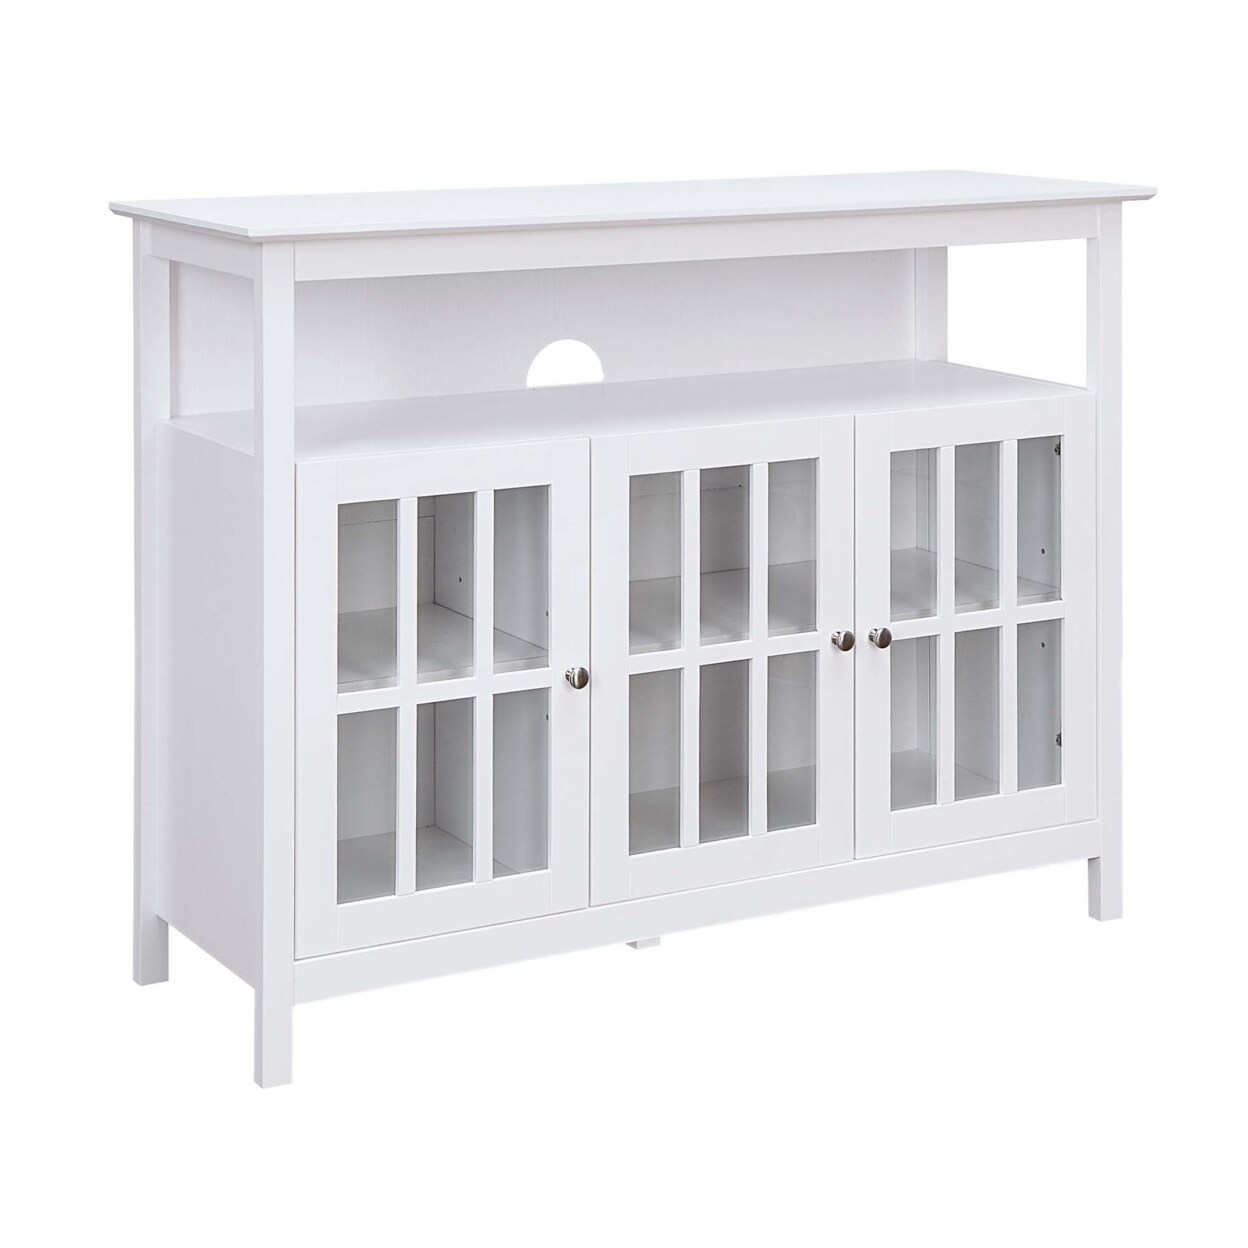 Convenience Concepts Big Sur Deluxe White 48 inch TV Stand with Storage Cabinets and Shelf